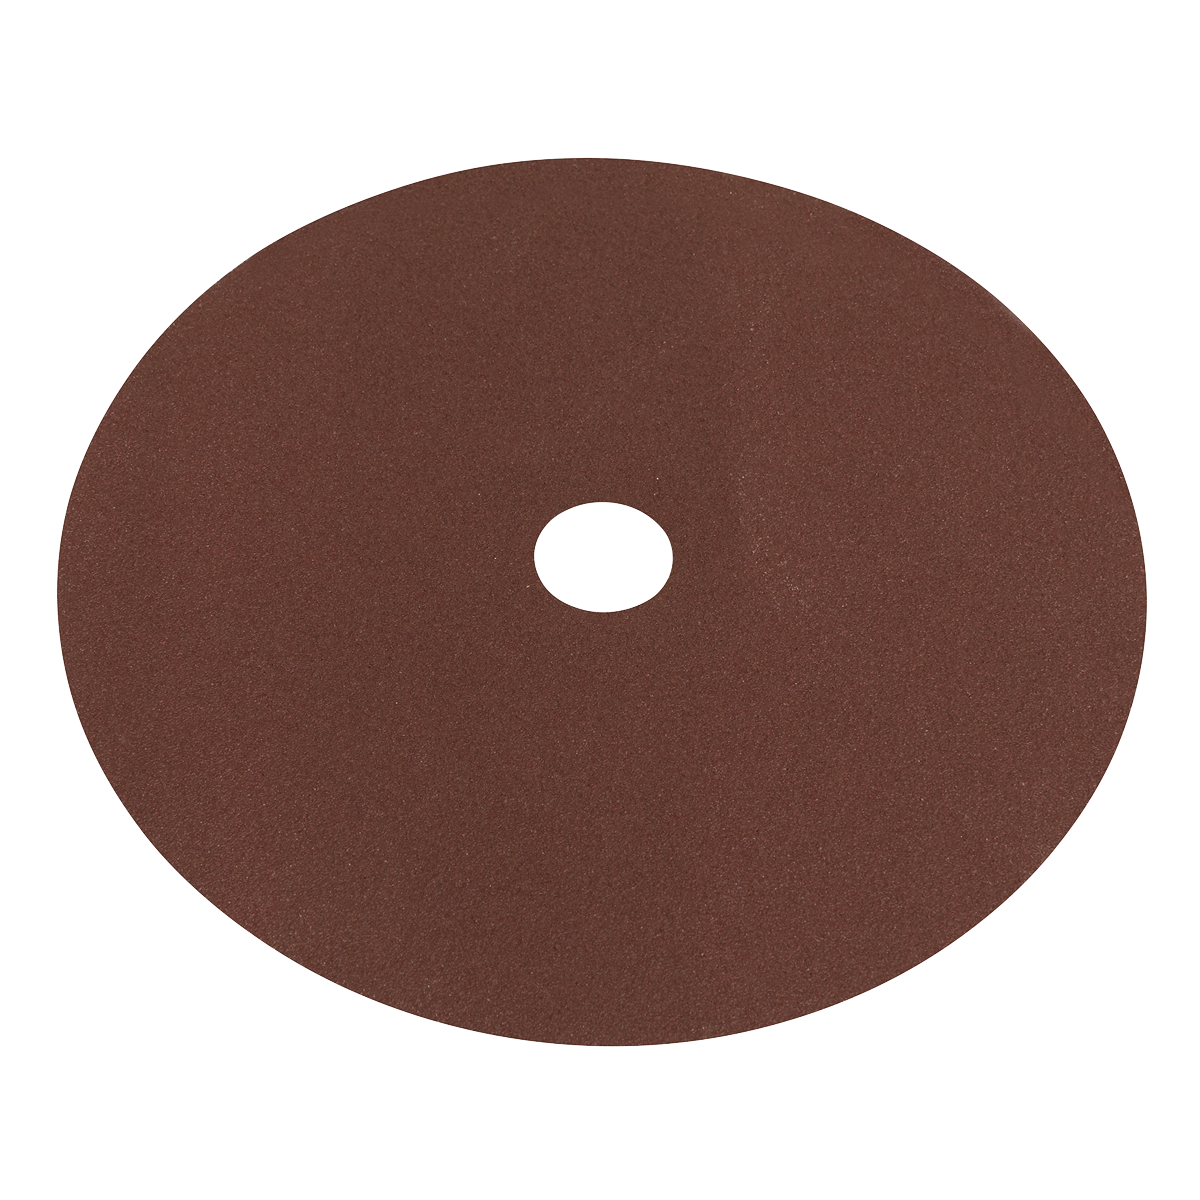 Fibre Backed Disc Ø175mm - 80Grit Pack of 25 - WSD780 - Farming Parts